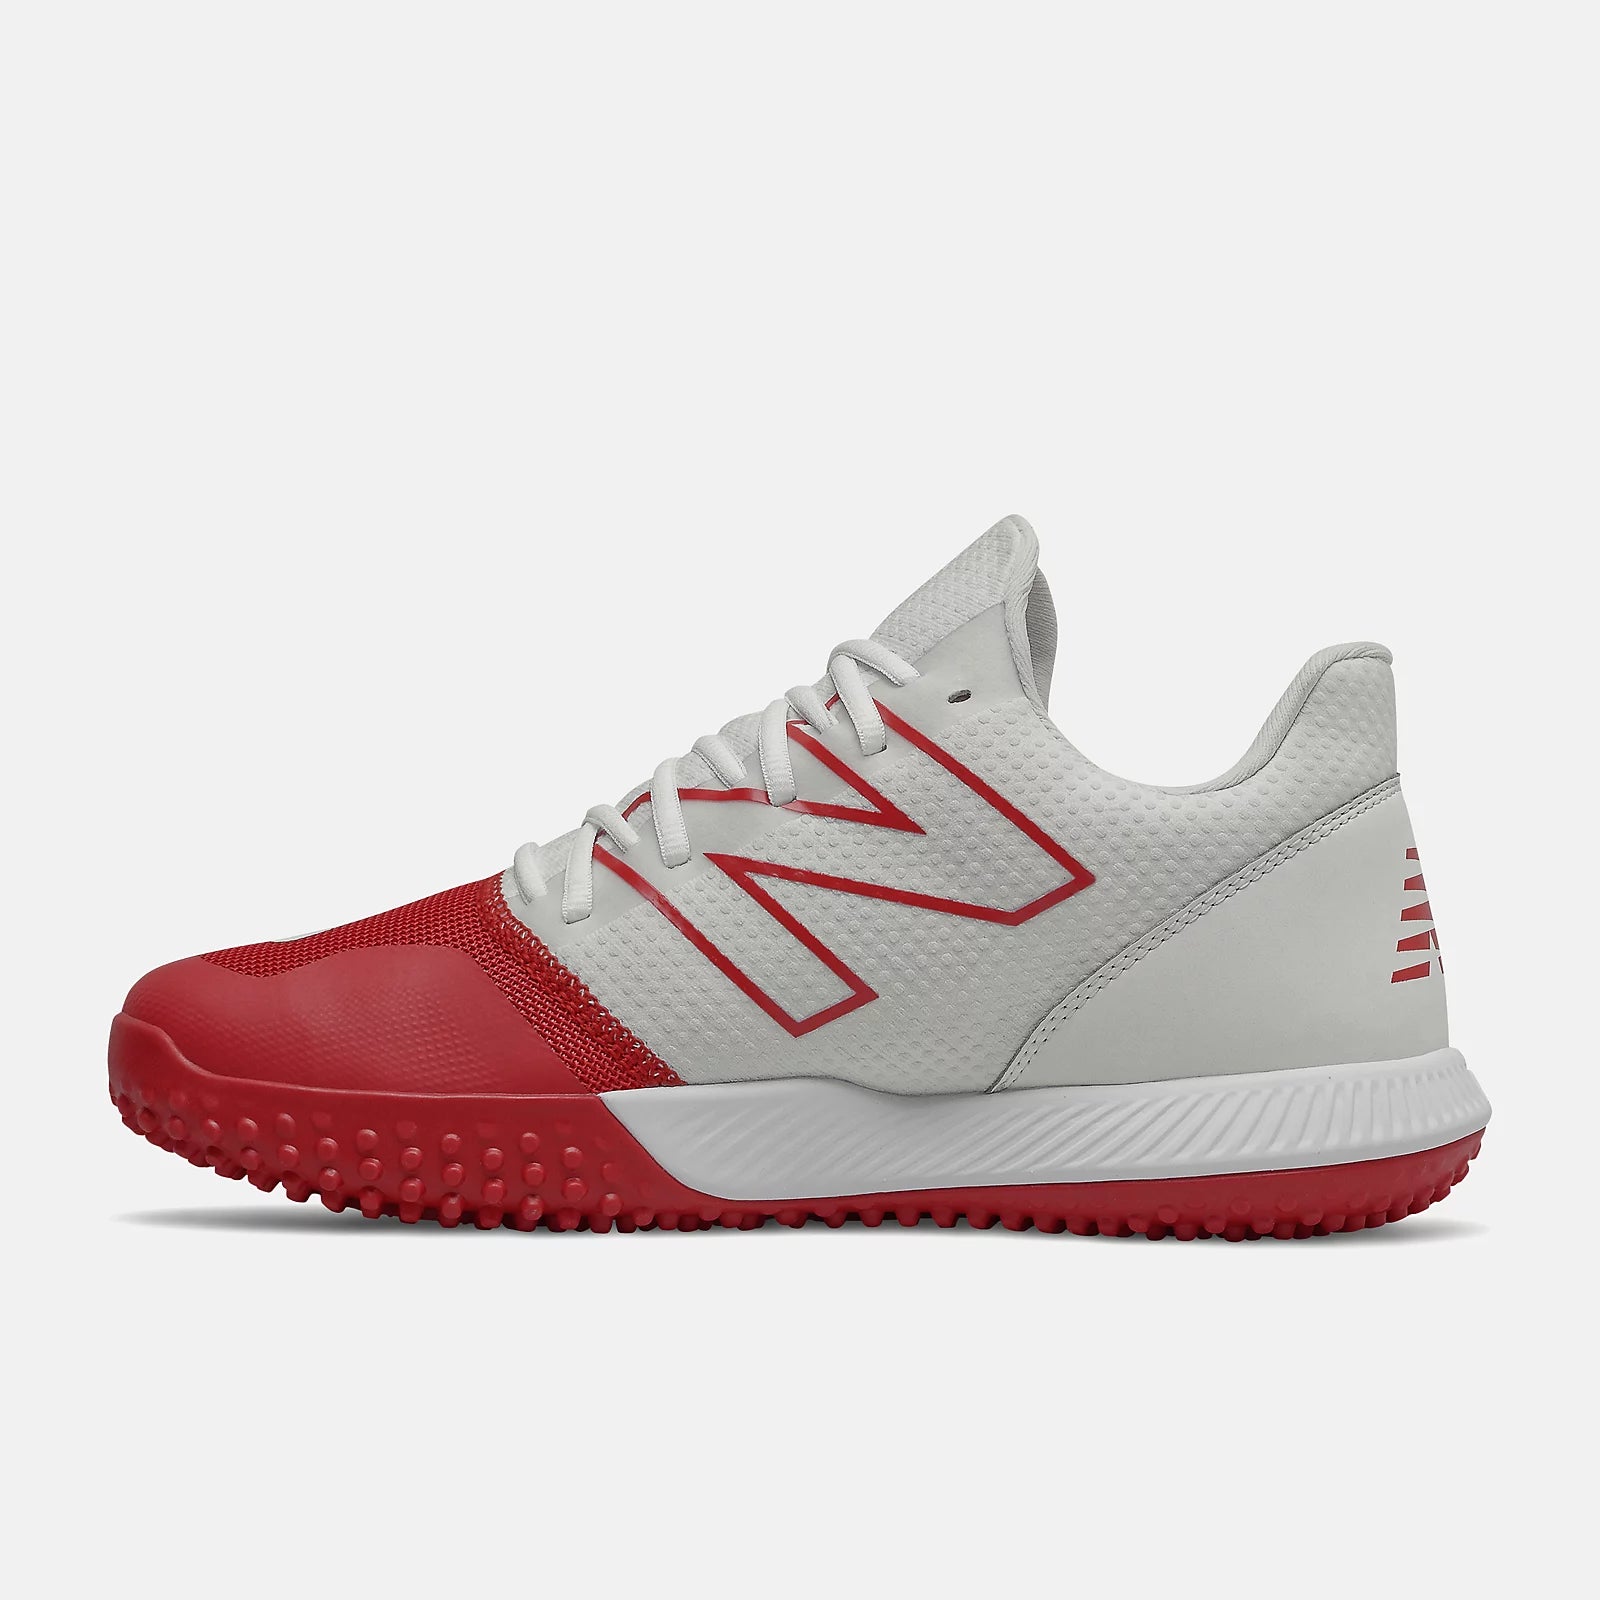 New Balance Turf Shoes - Red FuelCell 4040v6 (T4040TR6)